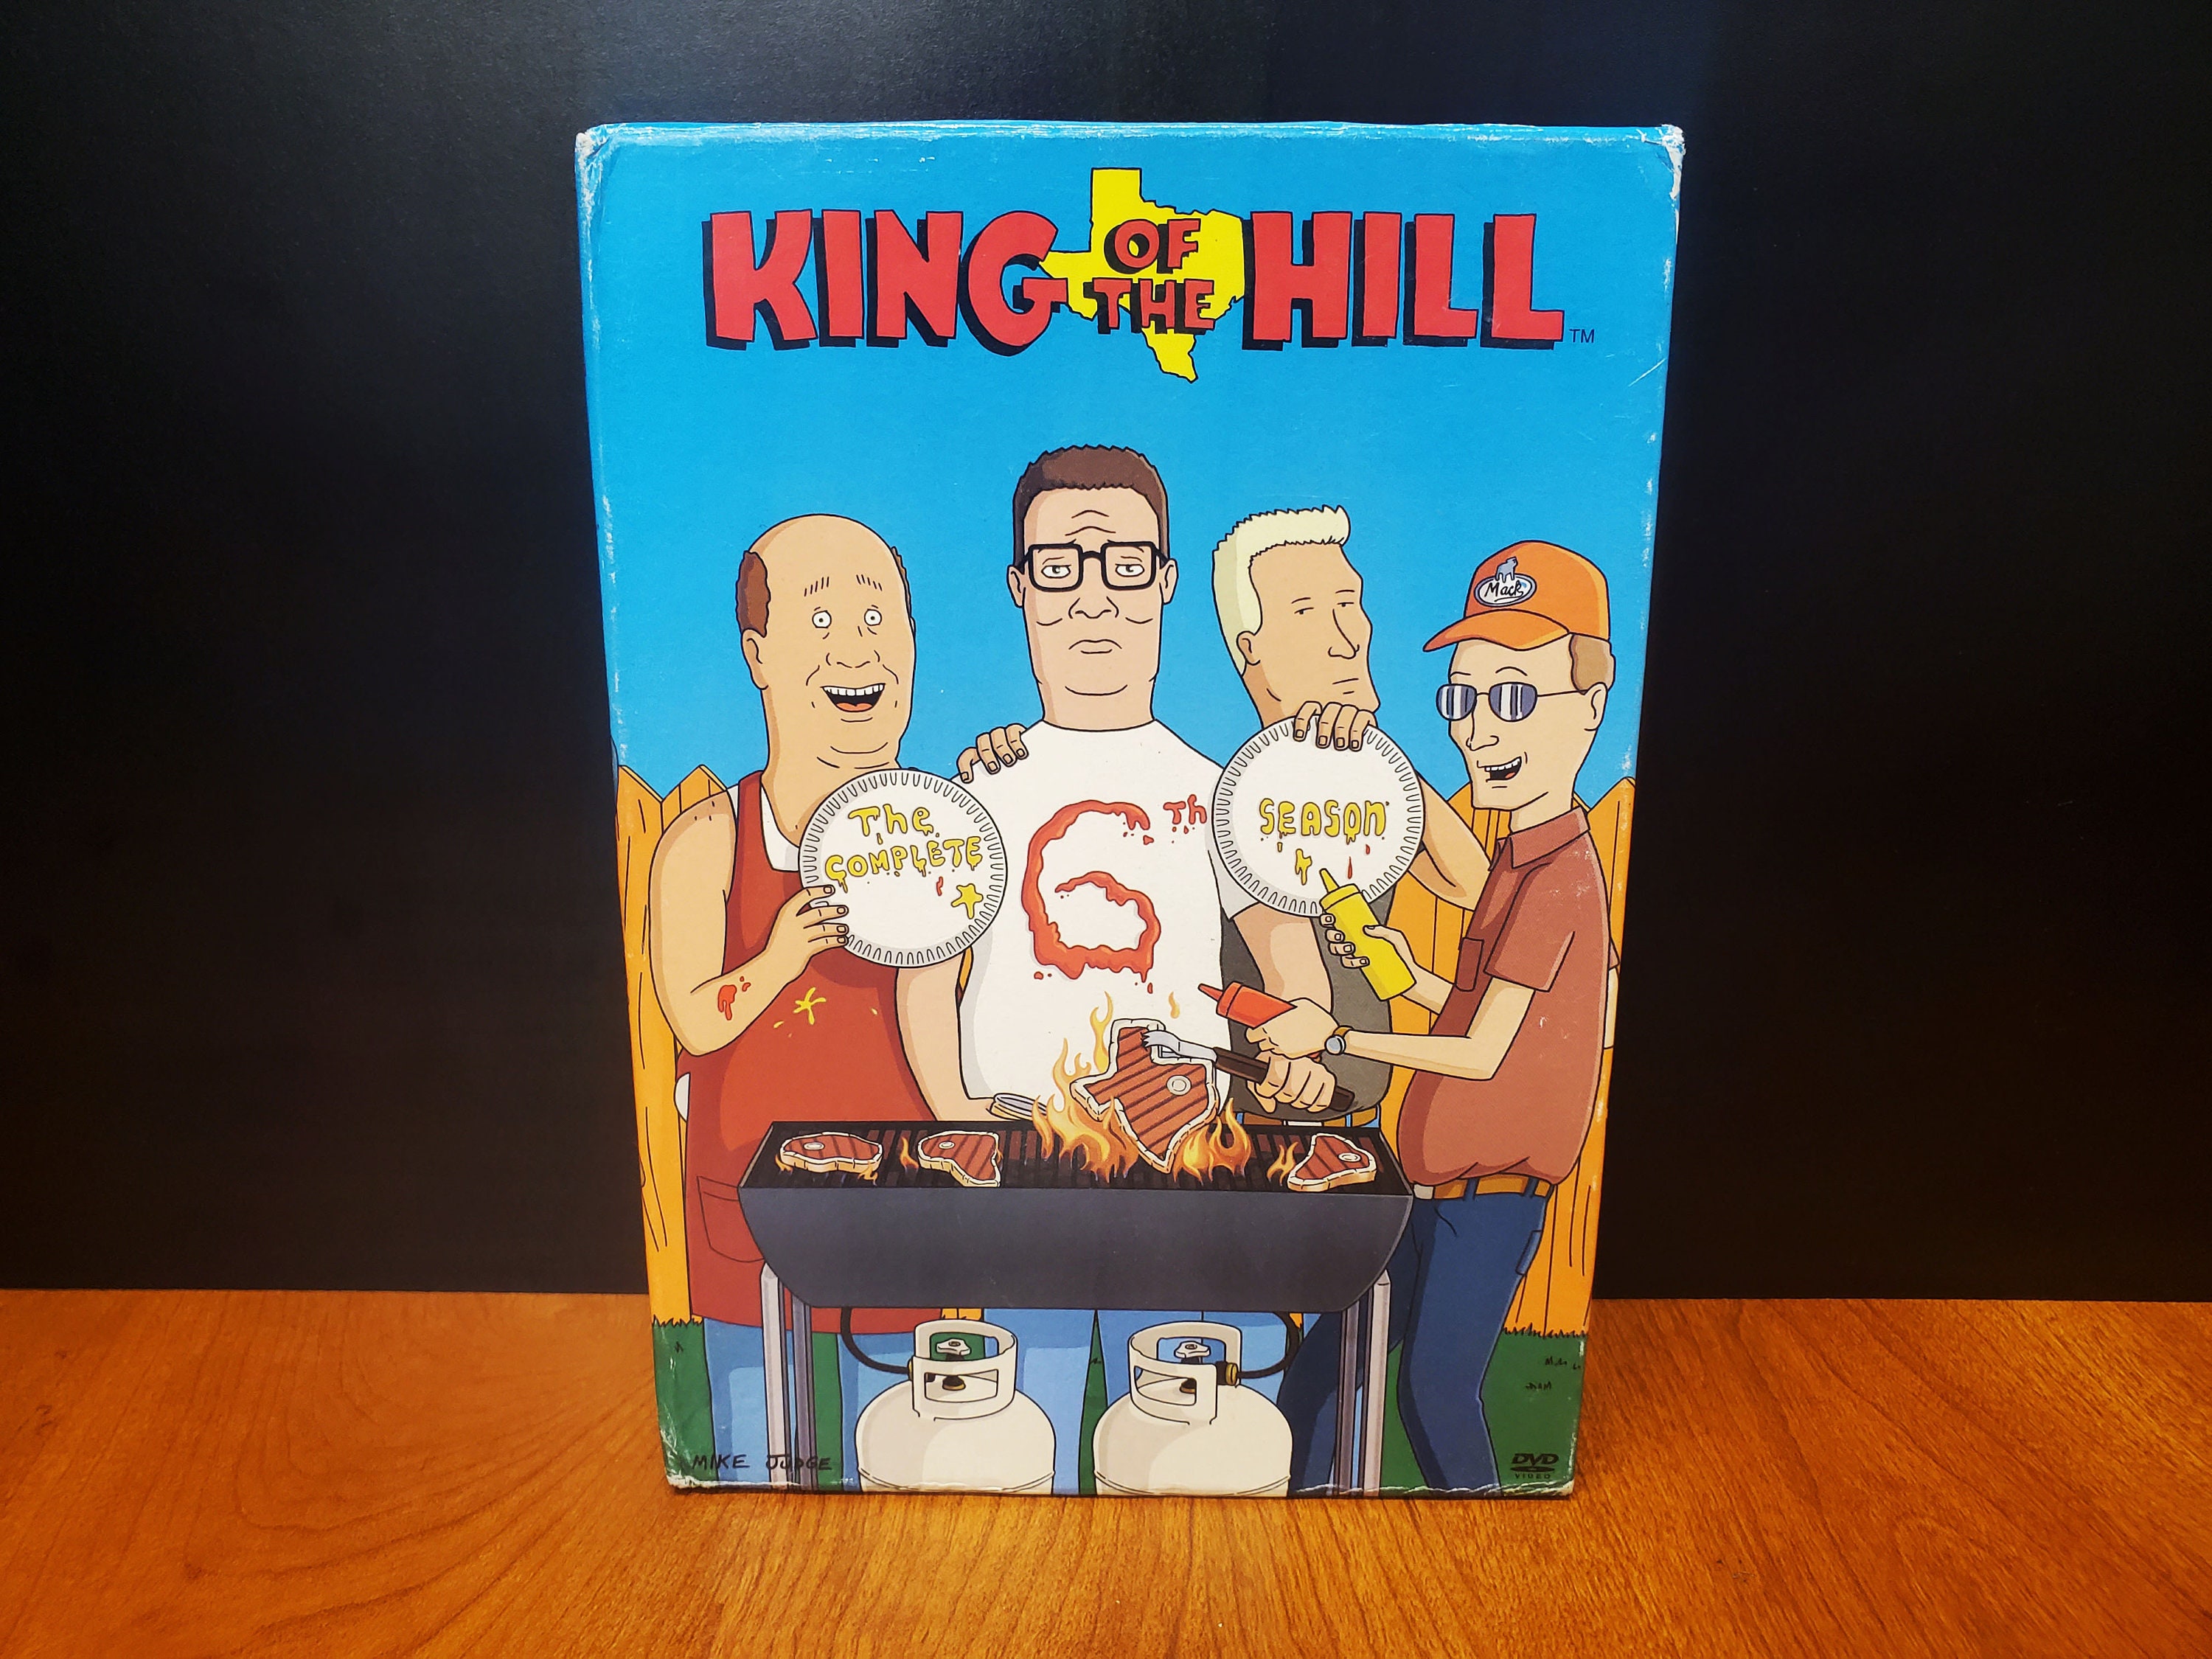  King of The Hill - The Complete Series (DVD, Season 1